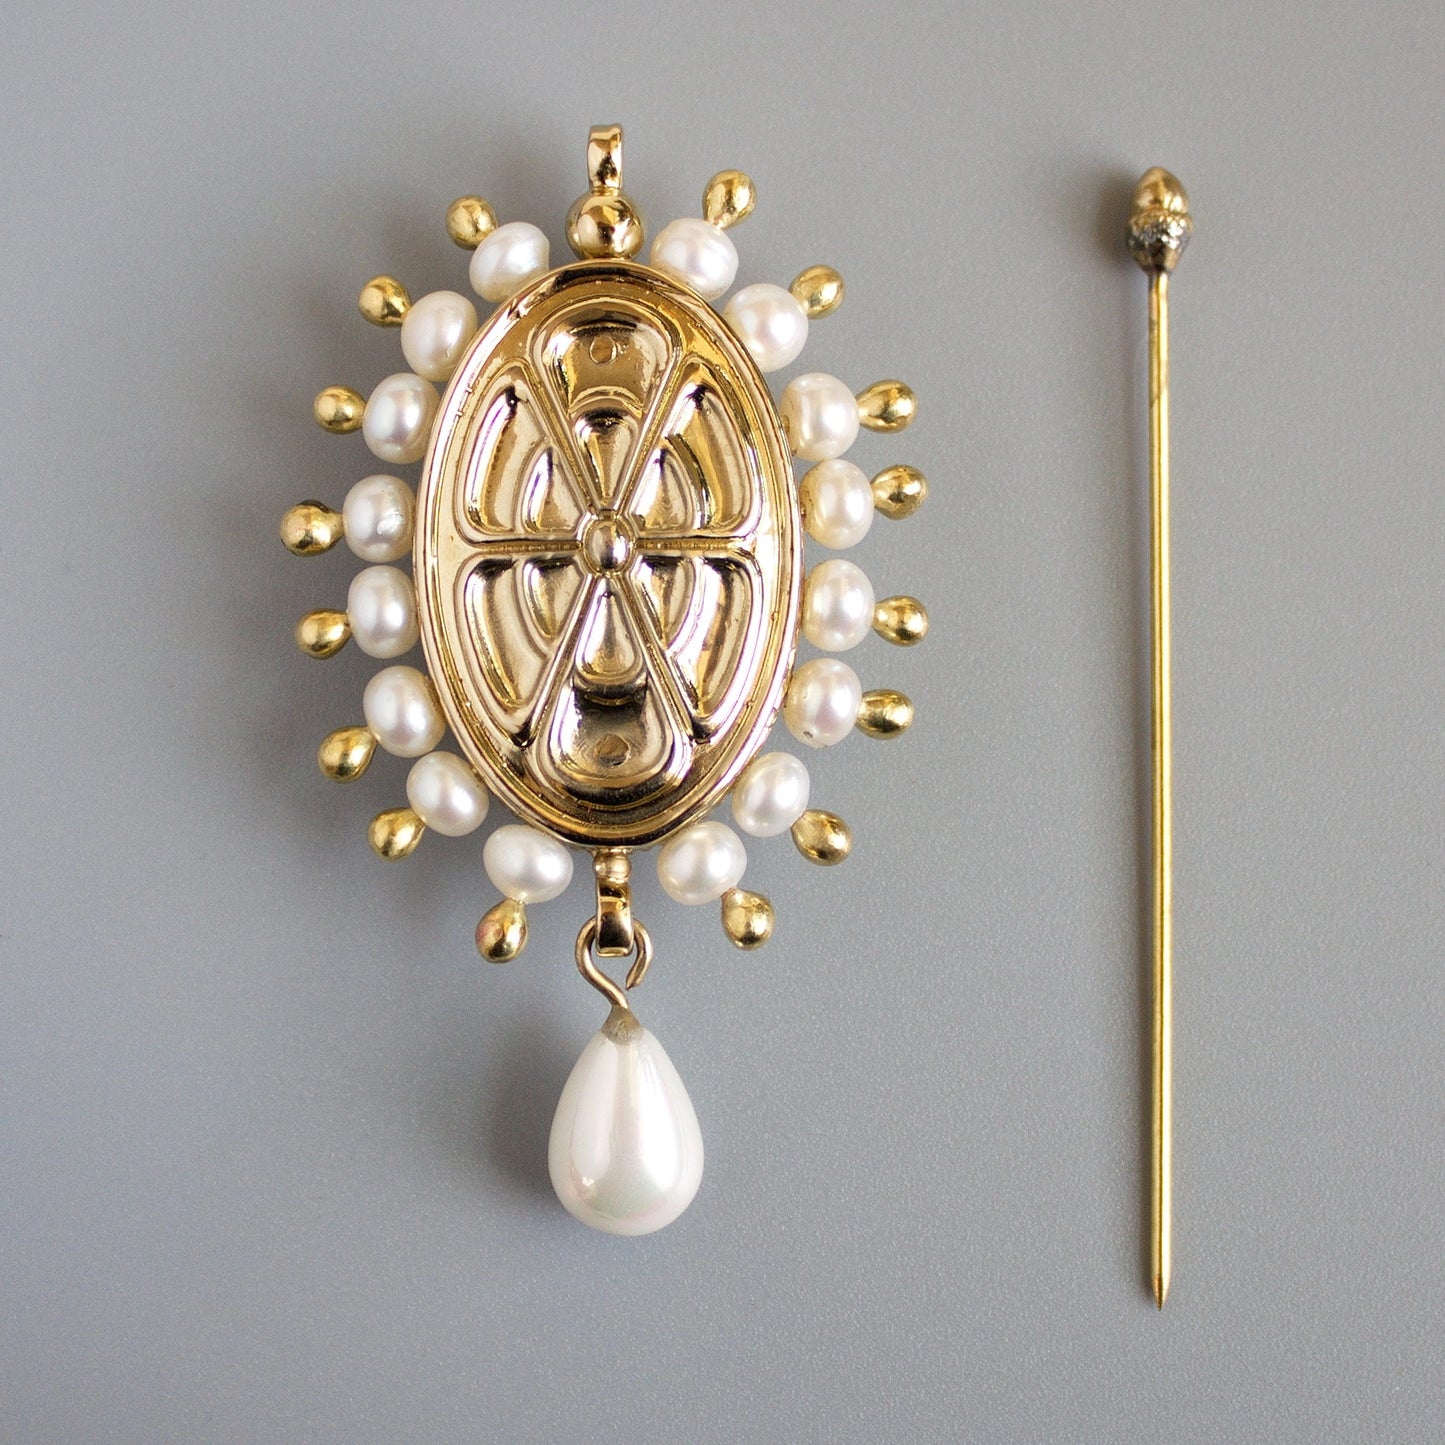 Mary of Burgundy Replica Brooch from the 15th Century